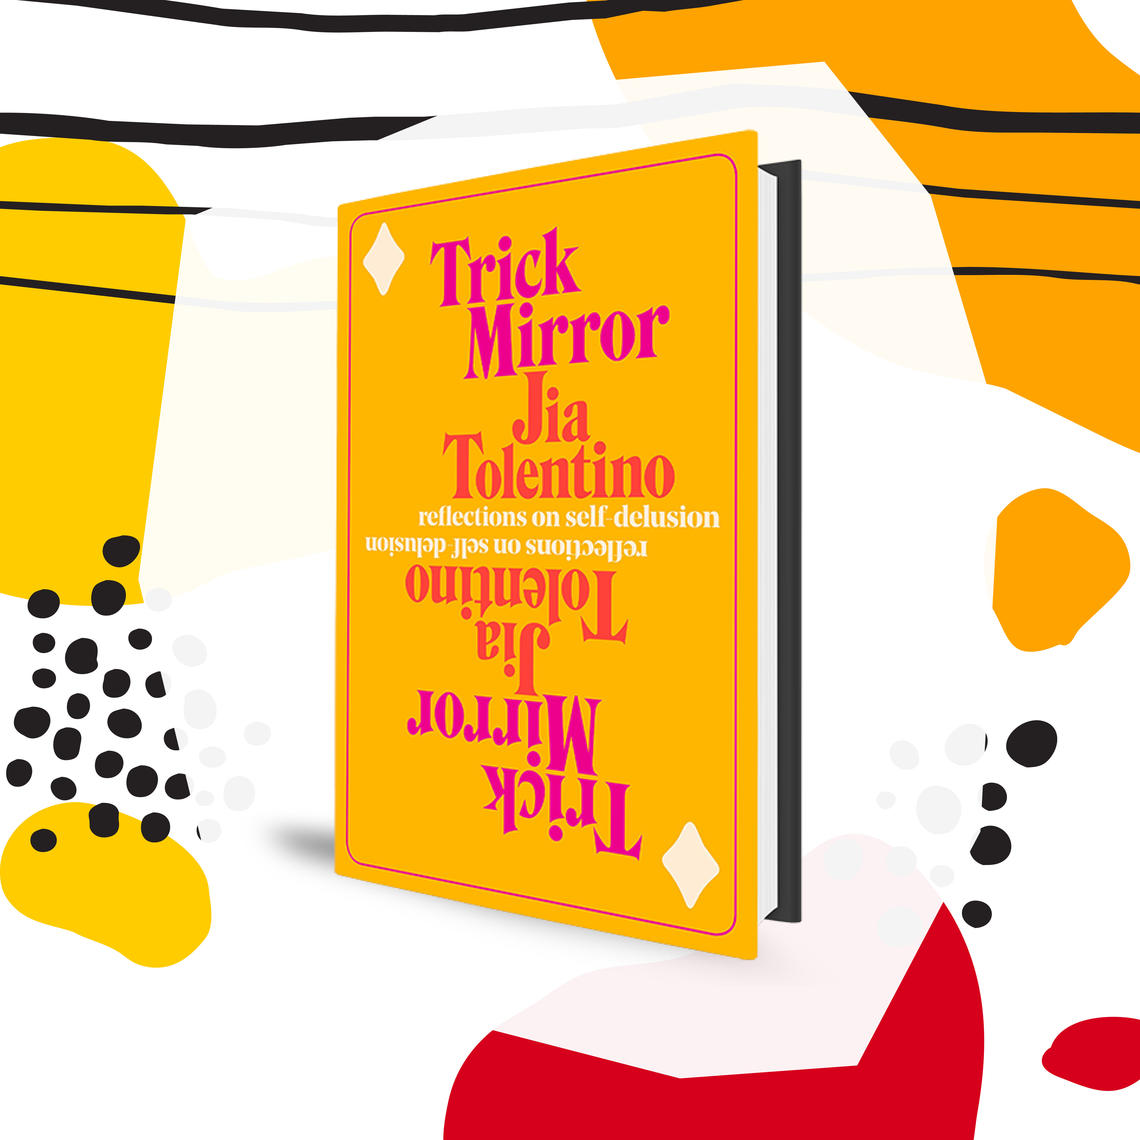 The cover of Trick Mirror by Jia Tolentino